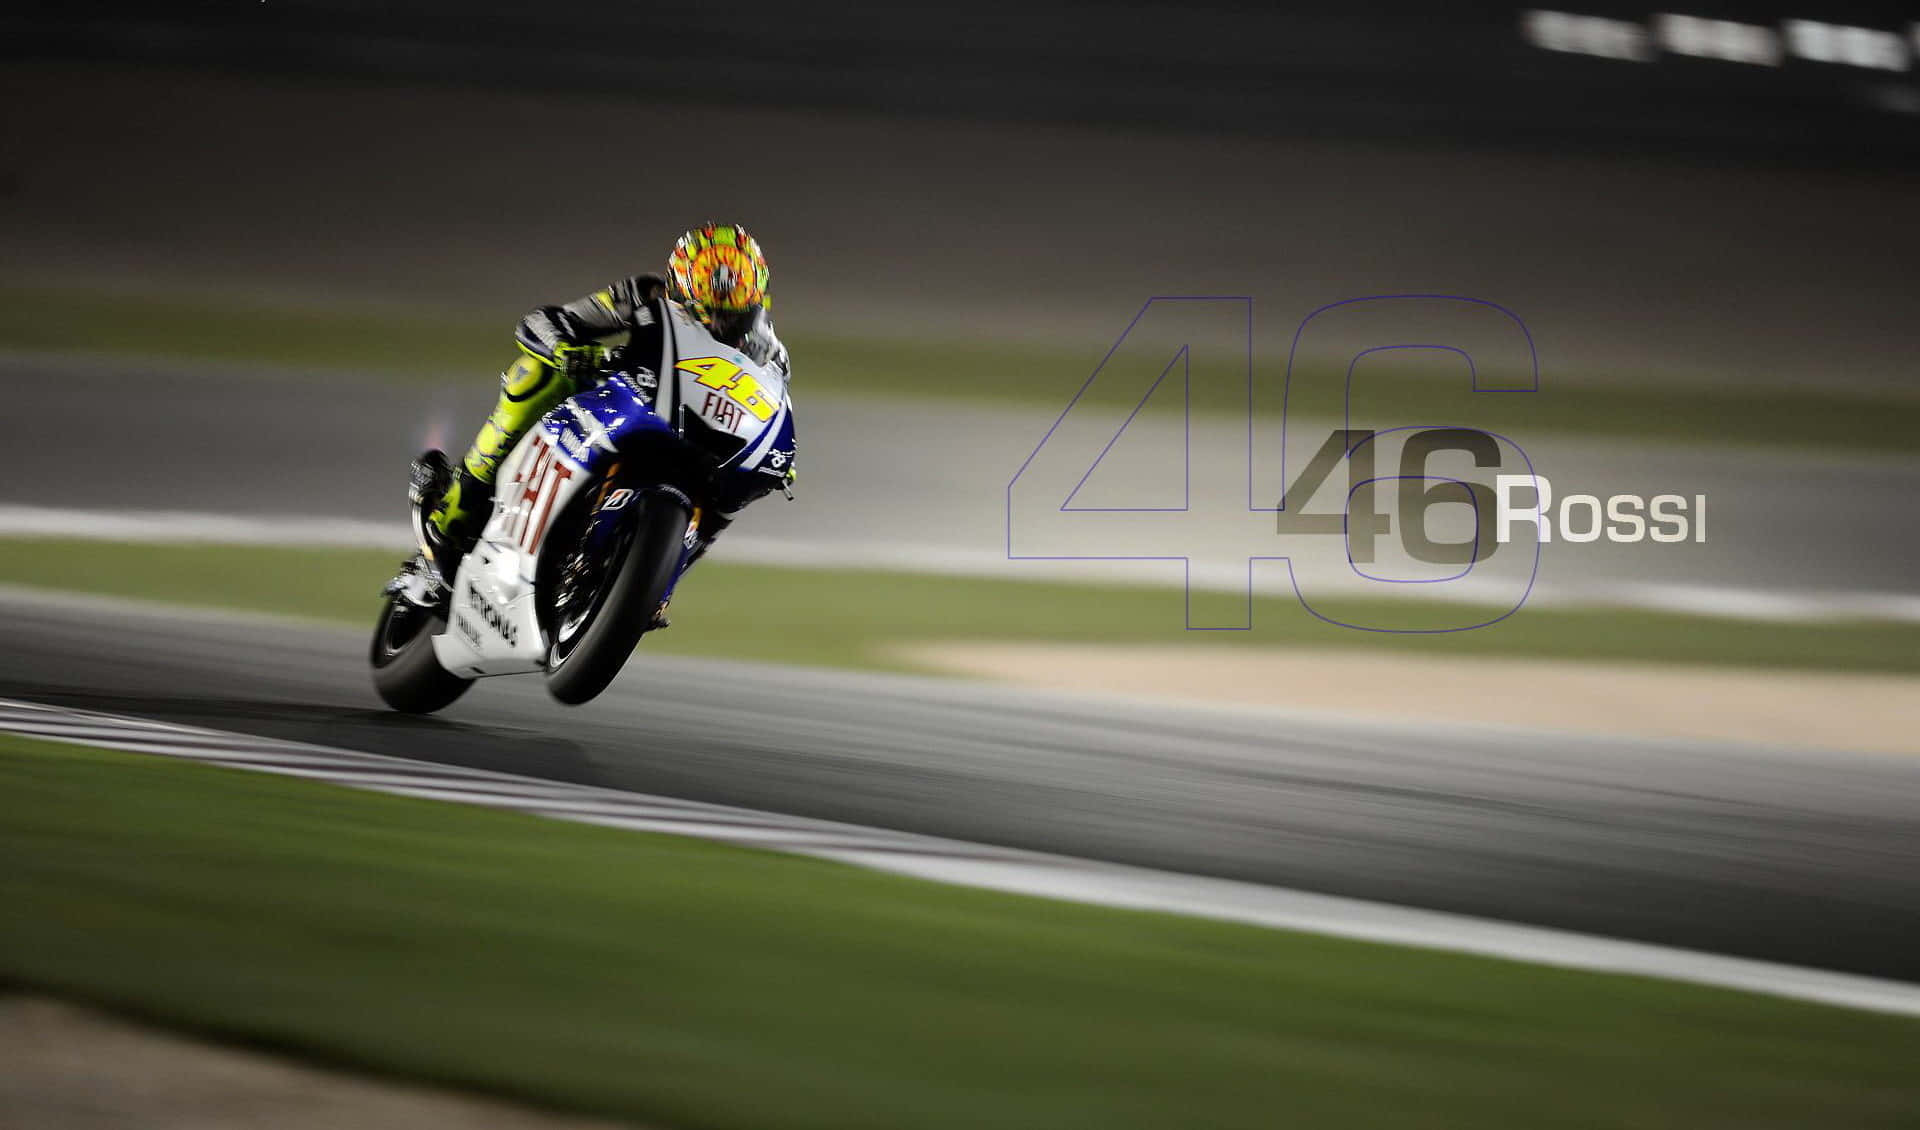 Vr46 Professional Racing Number